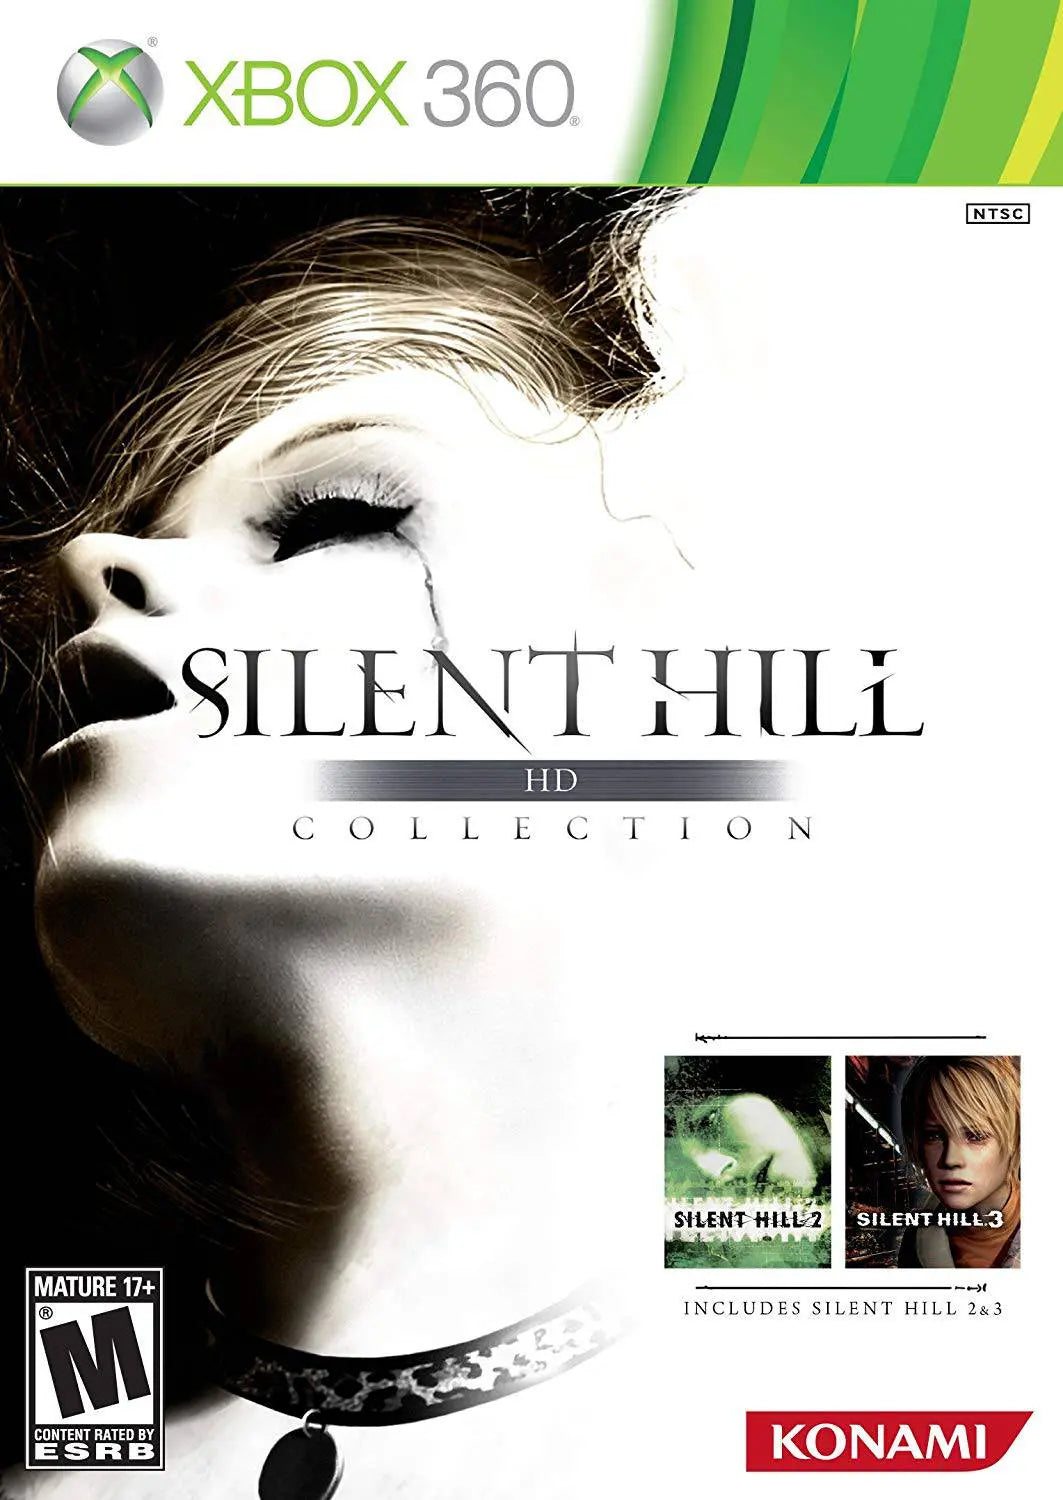 Silent Hill Hd Collection Xbox 360 - USED COPY King Gaming